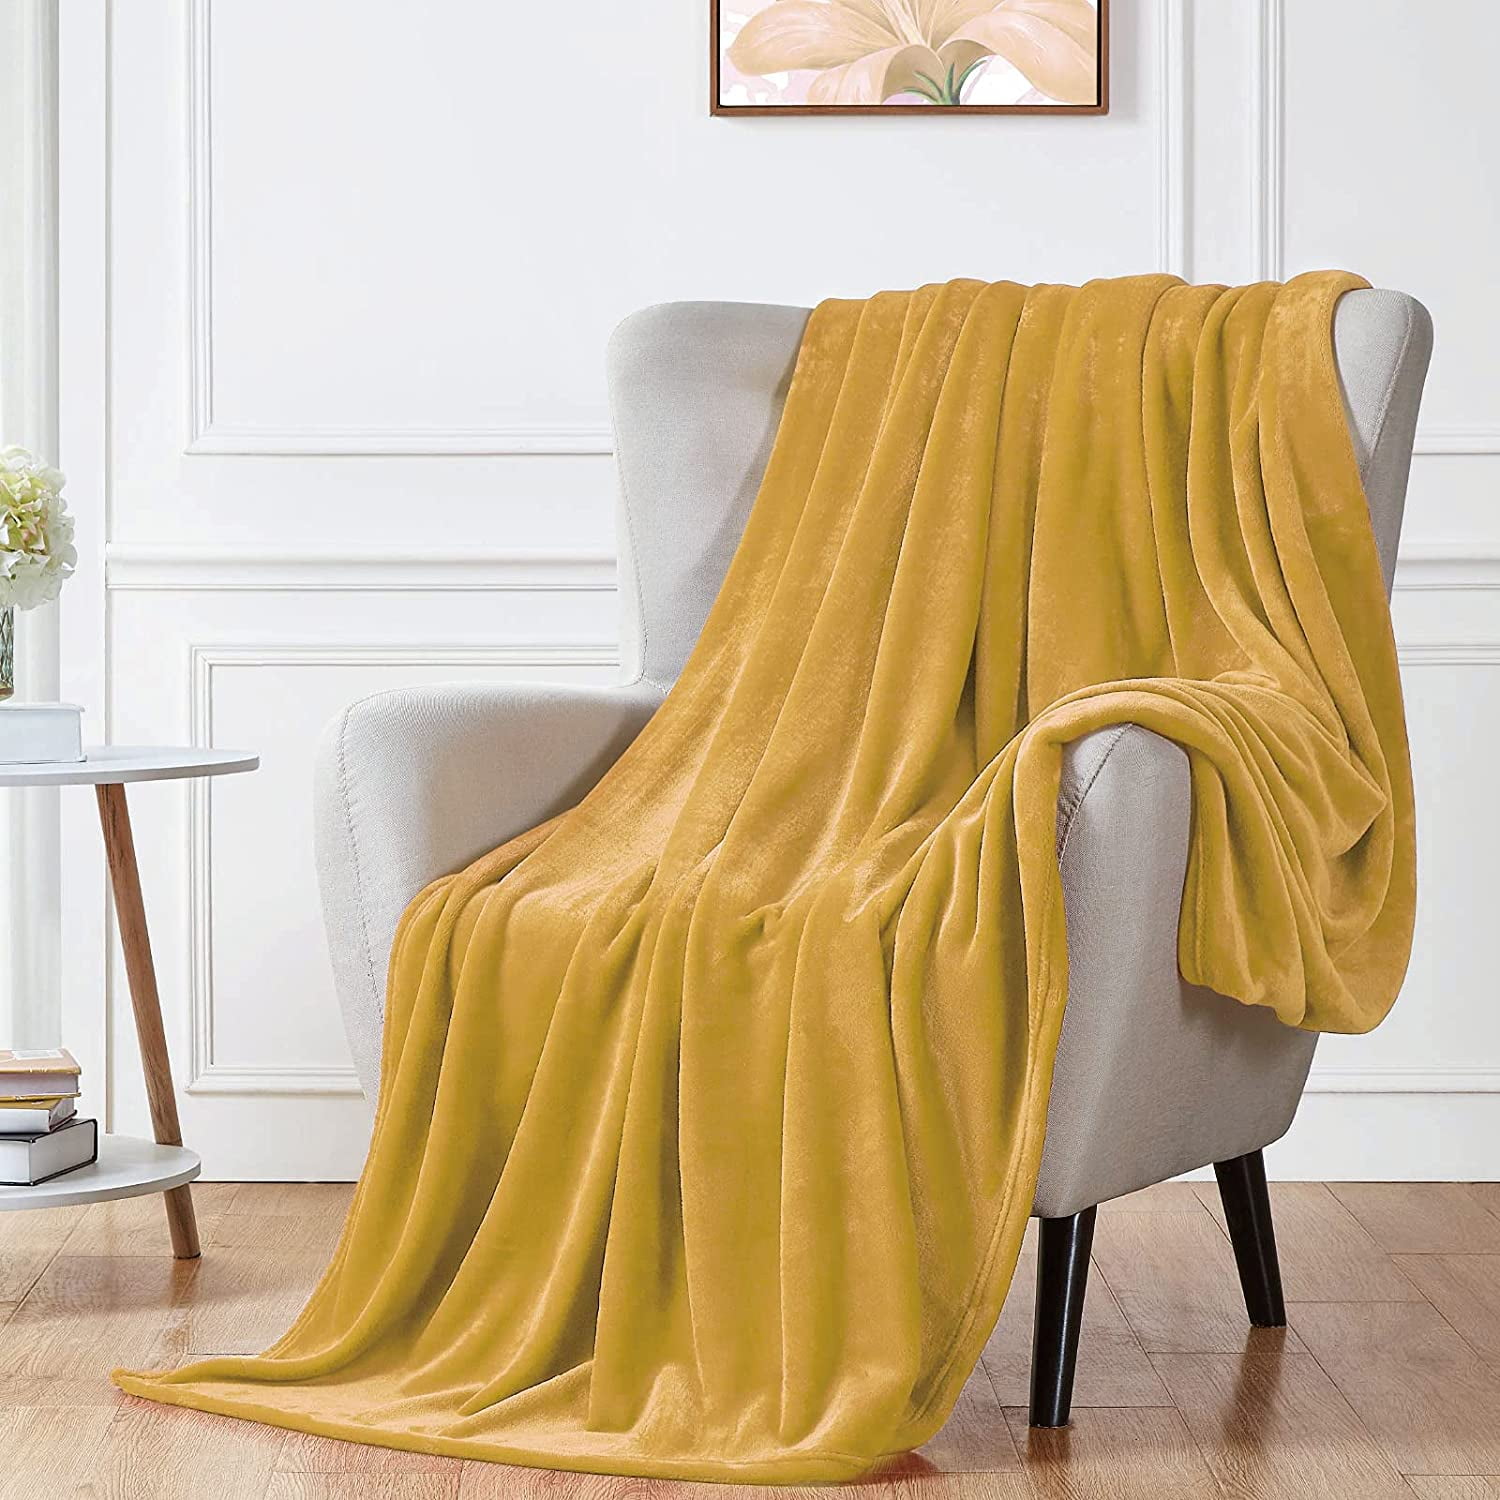 Bed Sofa Ultra Luxurious Warm and Cozy for All Seasons Walensee Sherpa Fleece Blanket Twin Size 60”x80” Honey Gold Plush Throw Fuzzy Super Soft Reversible Microfiber Flannel Blankets for Couch